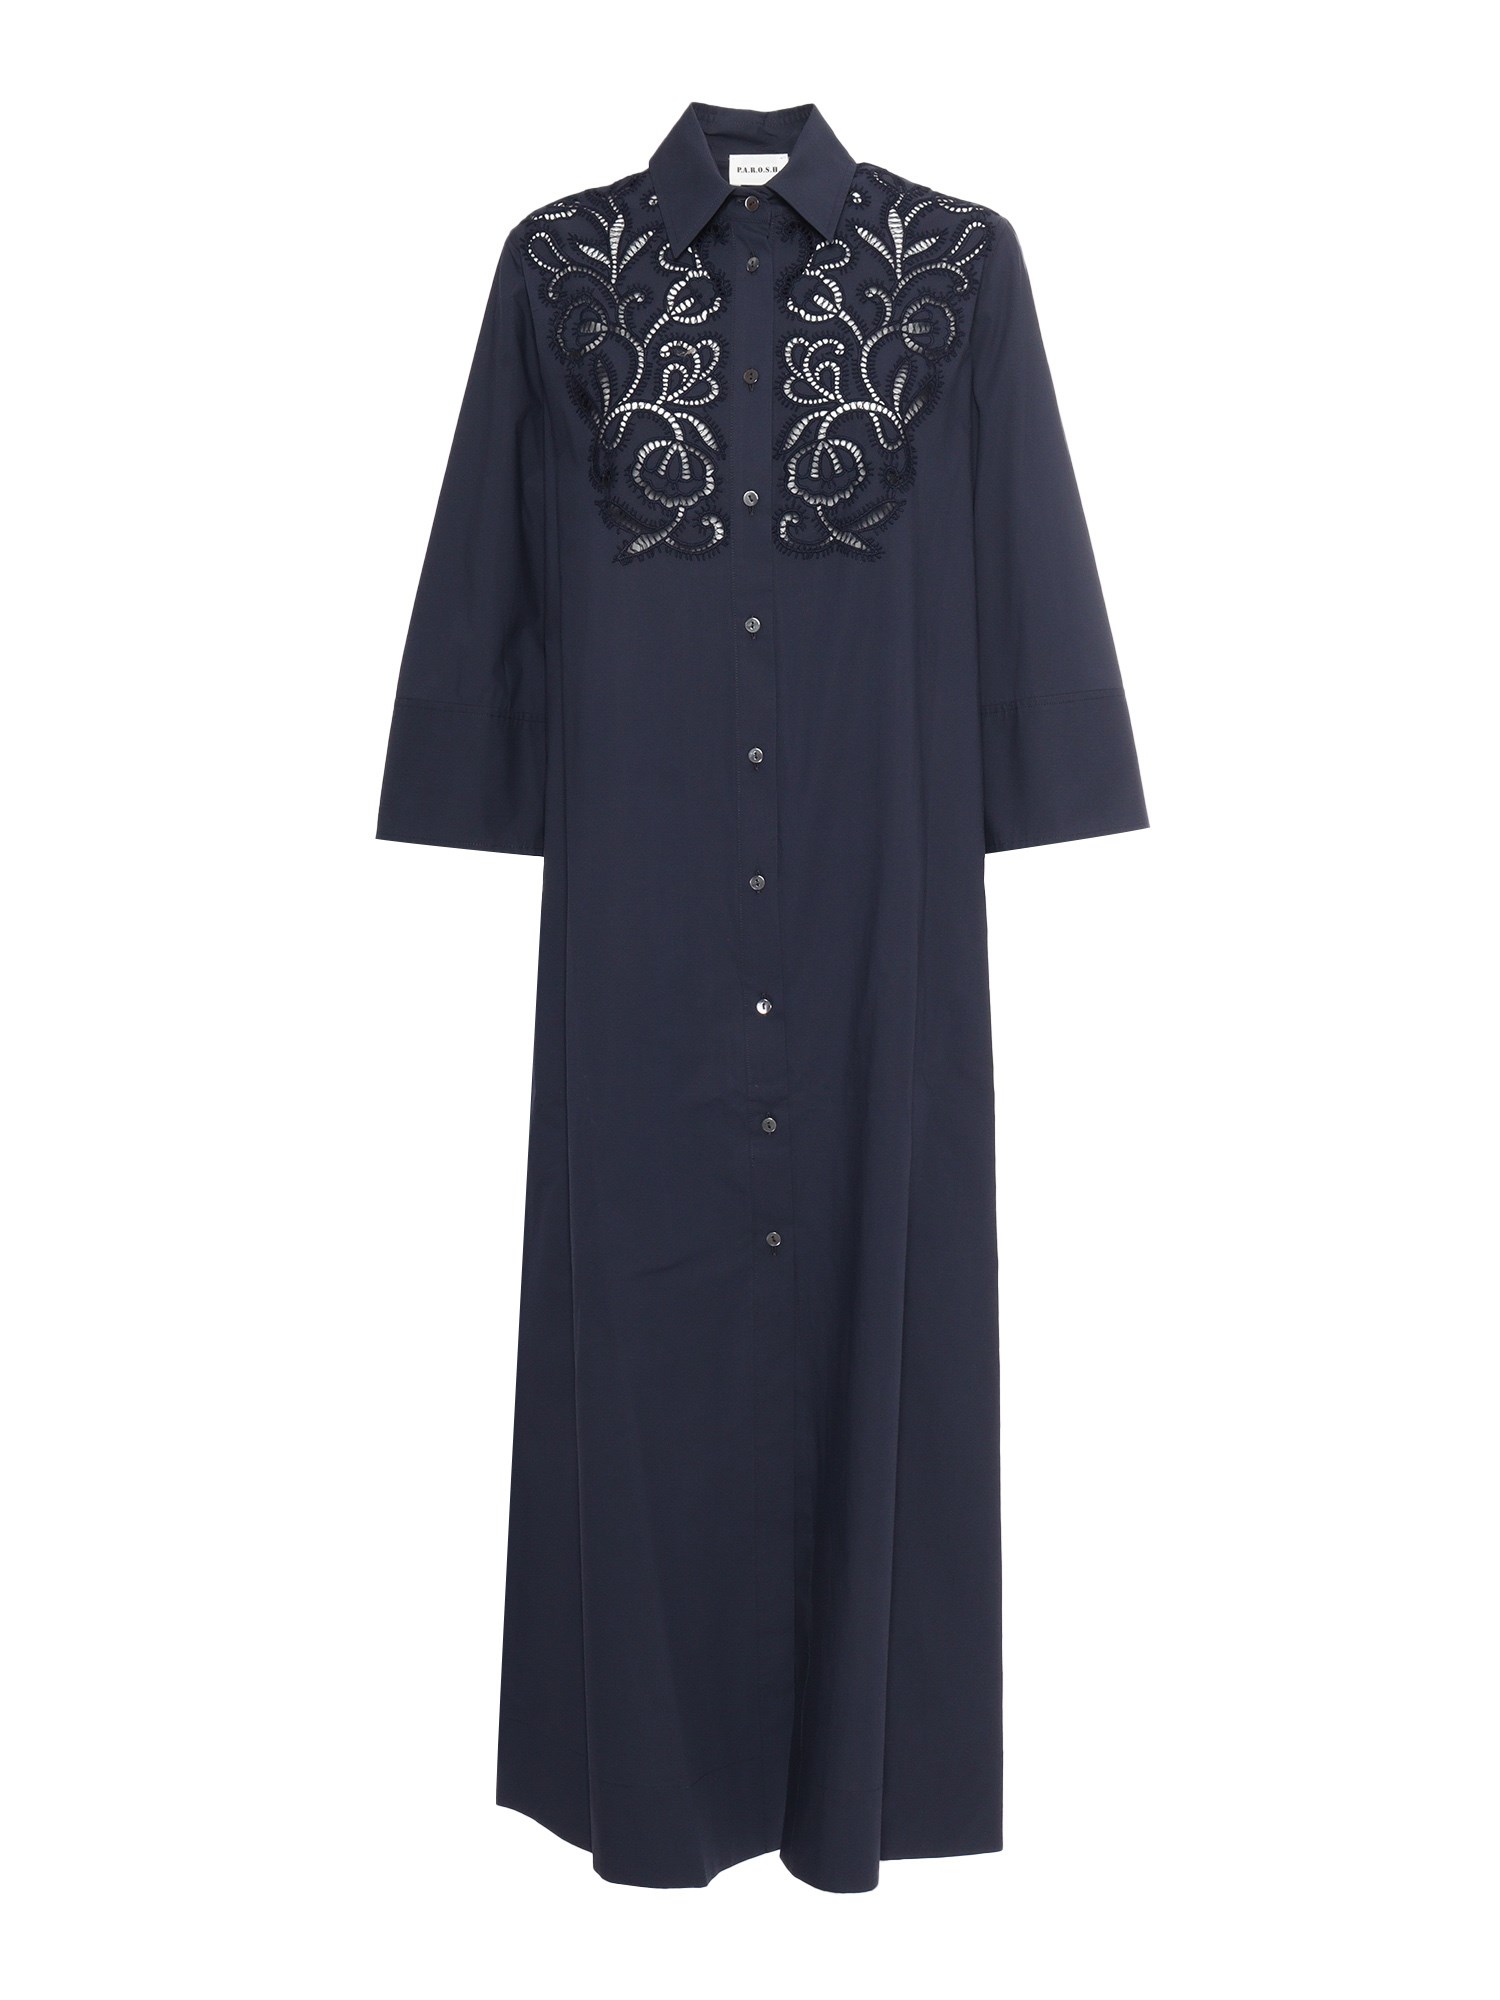 P.a.r.o.s.h Shirt Dress With Openwork Lace In Blue